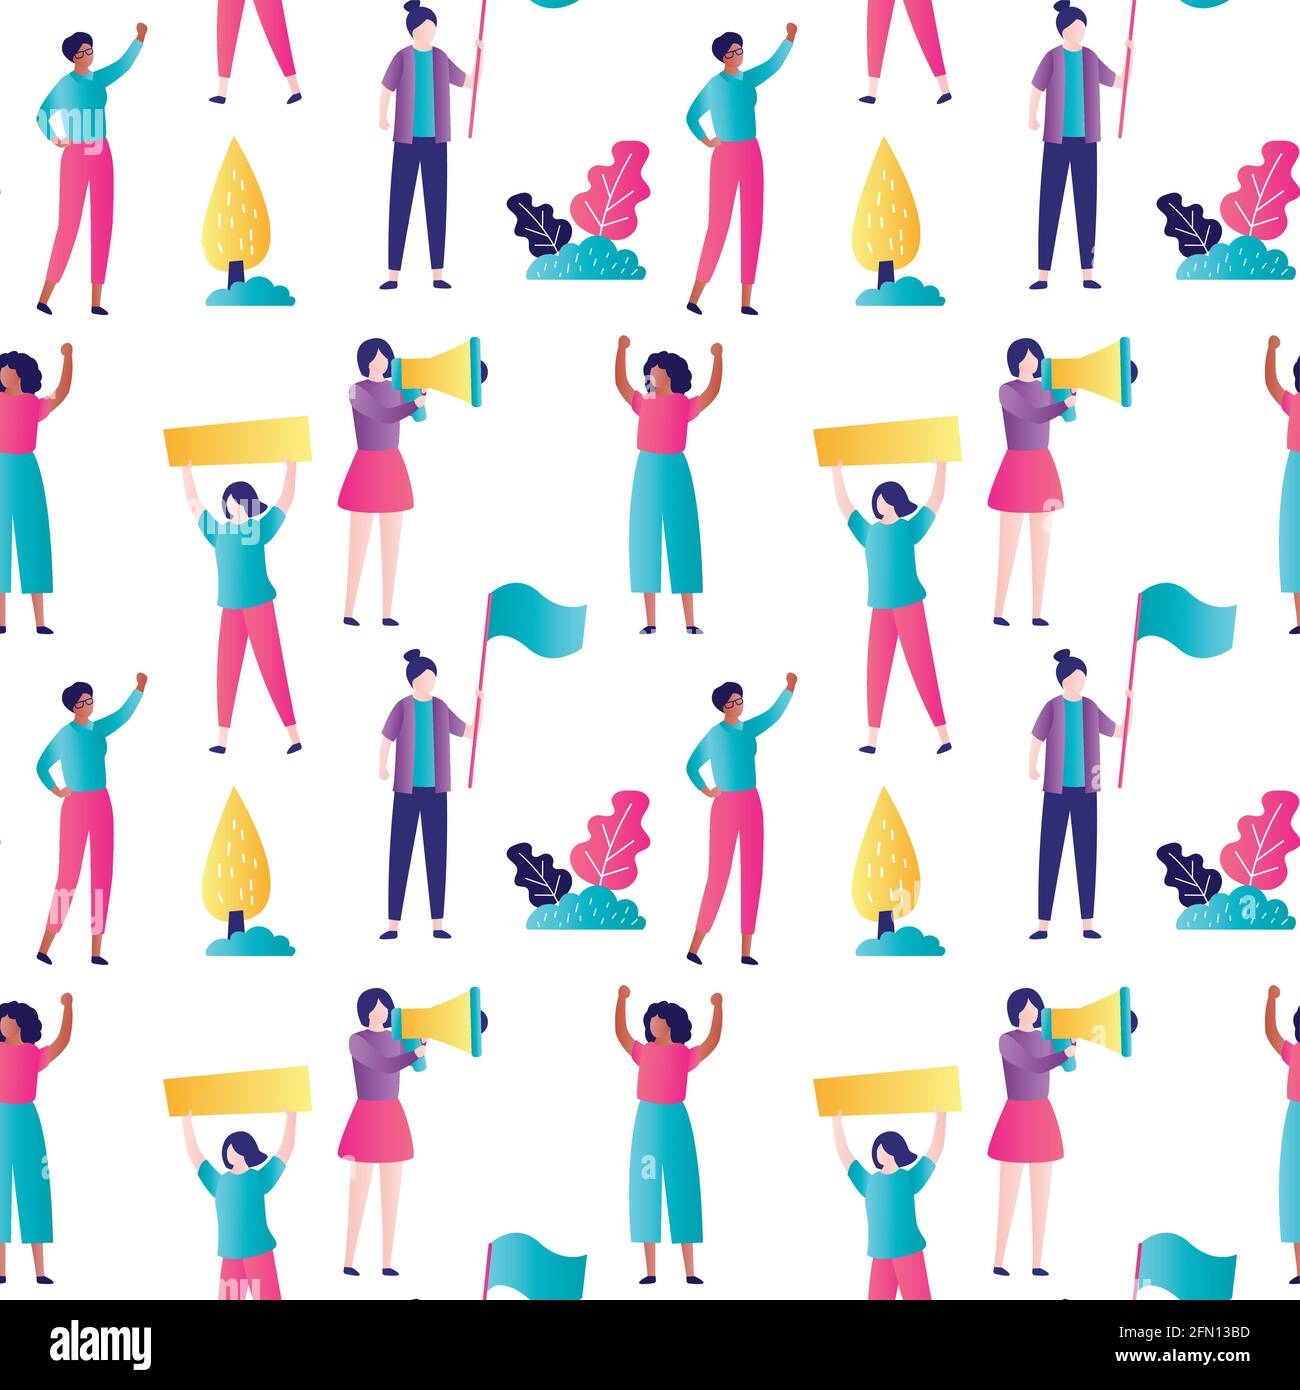 Diverse multinational womens with placards on protest or rally. Girl Power seamless pattern. Feminine and feminism, woman empowerment ideas. Internati Stock Vector